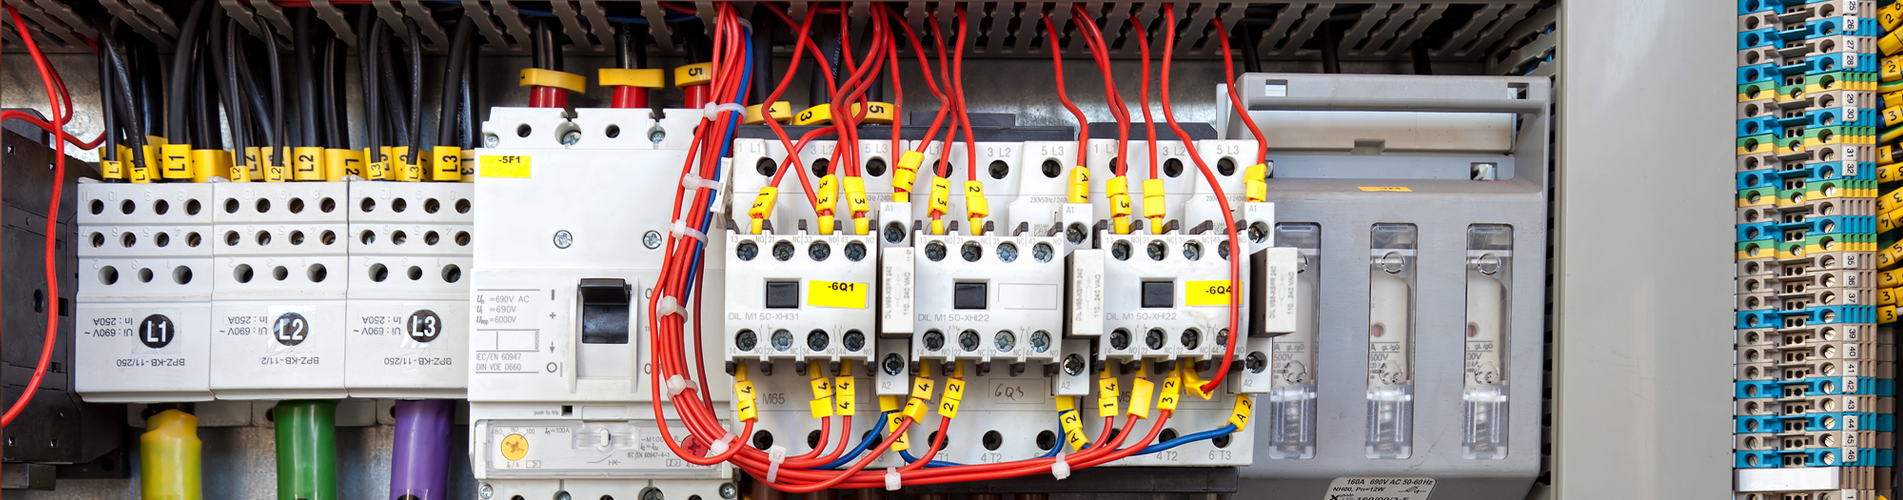 Commercial Electrical Control Panel